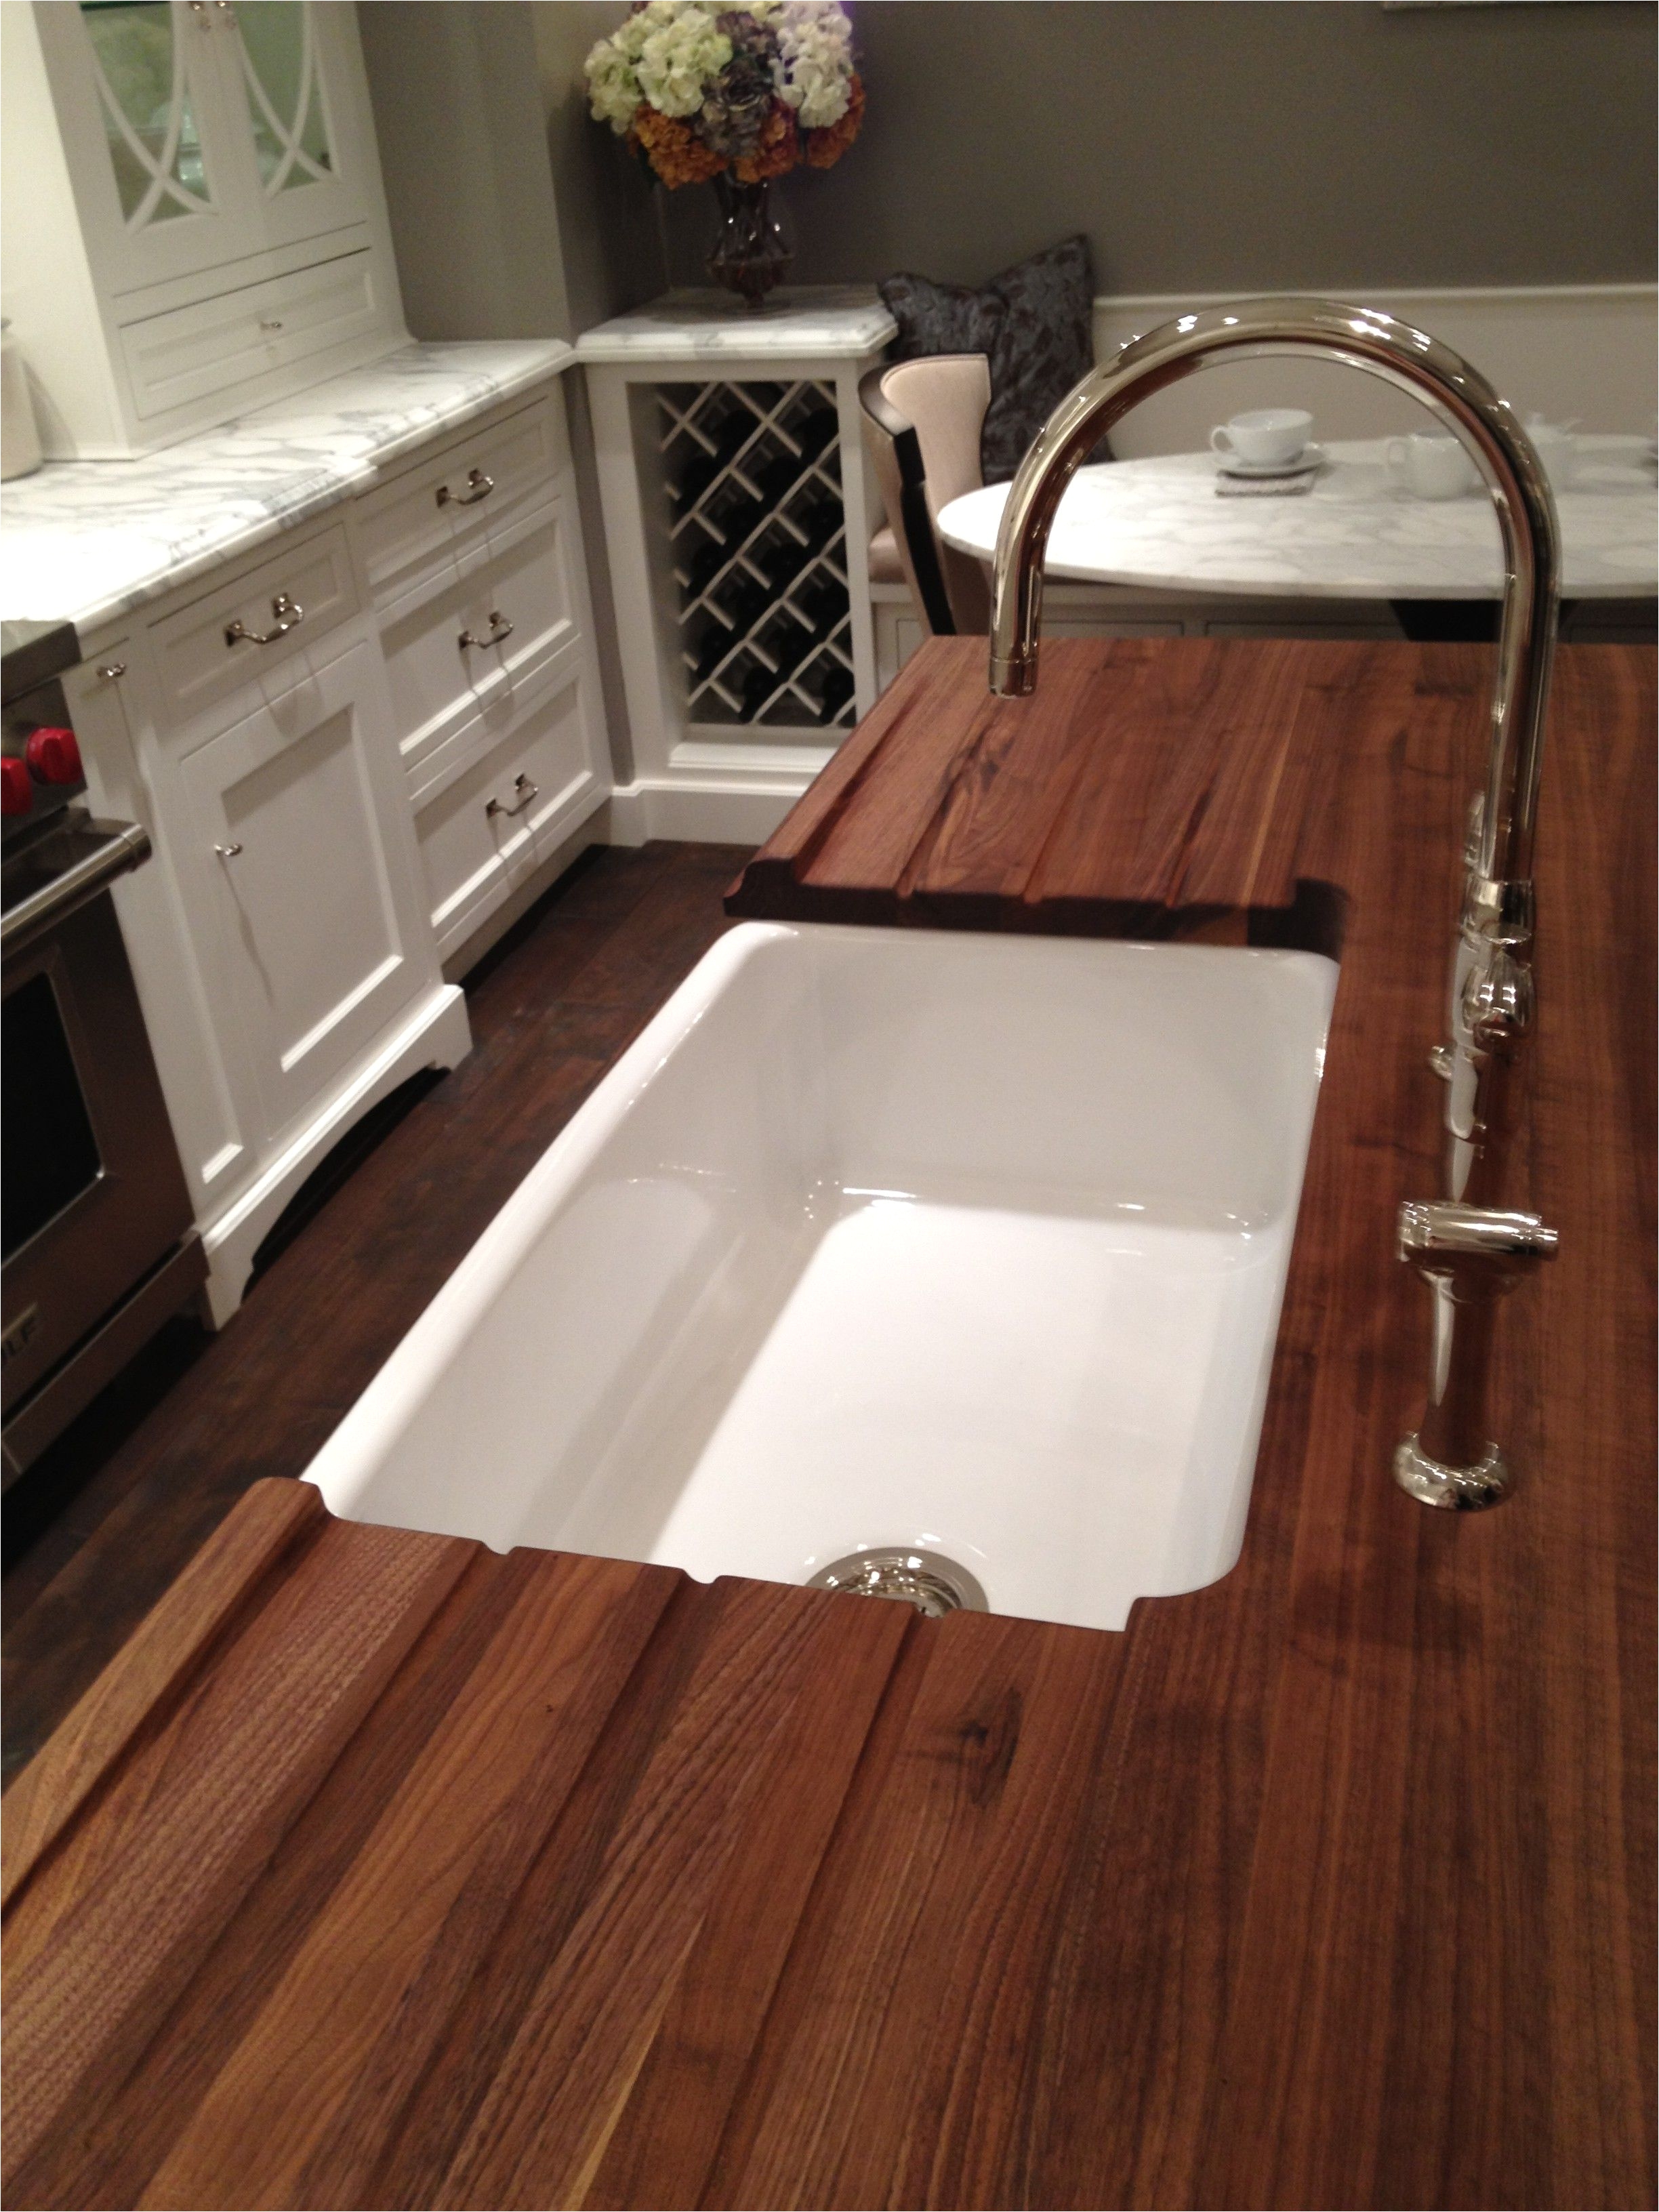 maple wood plank counter top mixed white fiberglass apron sink lovable white apron sink ideas to make over your kitchen decoration interior kitchen